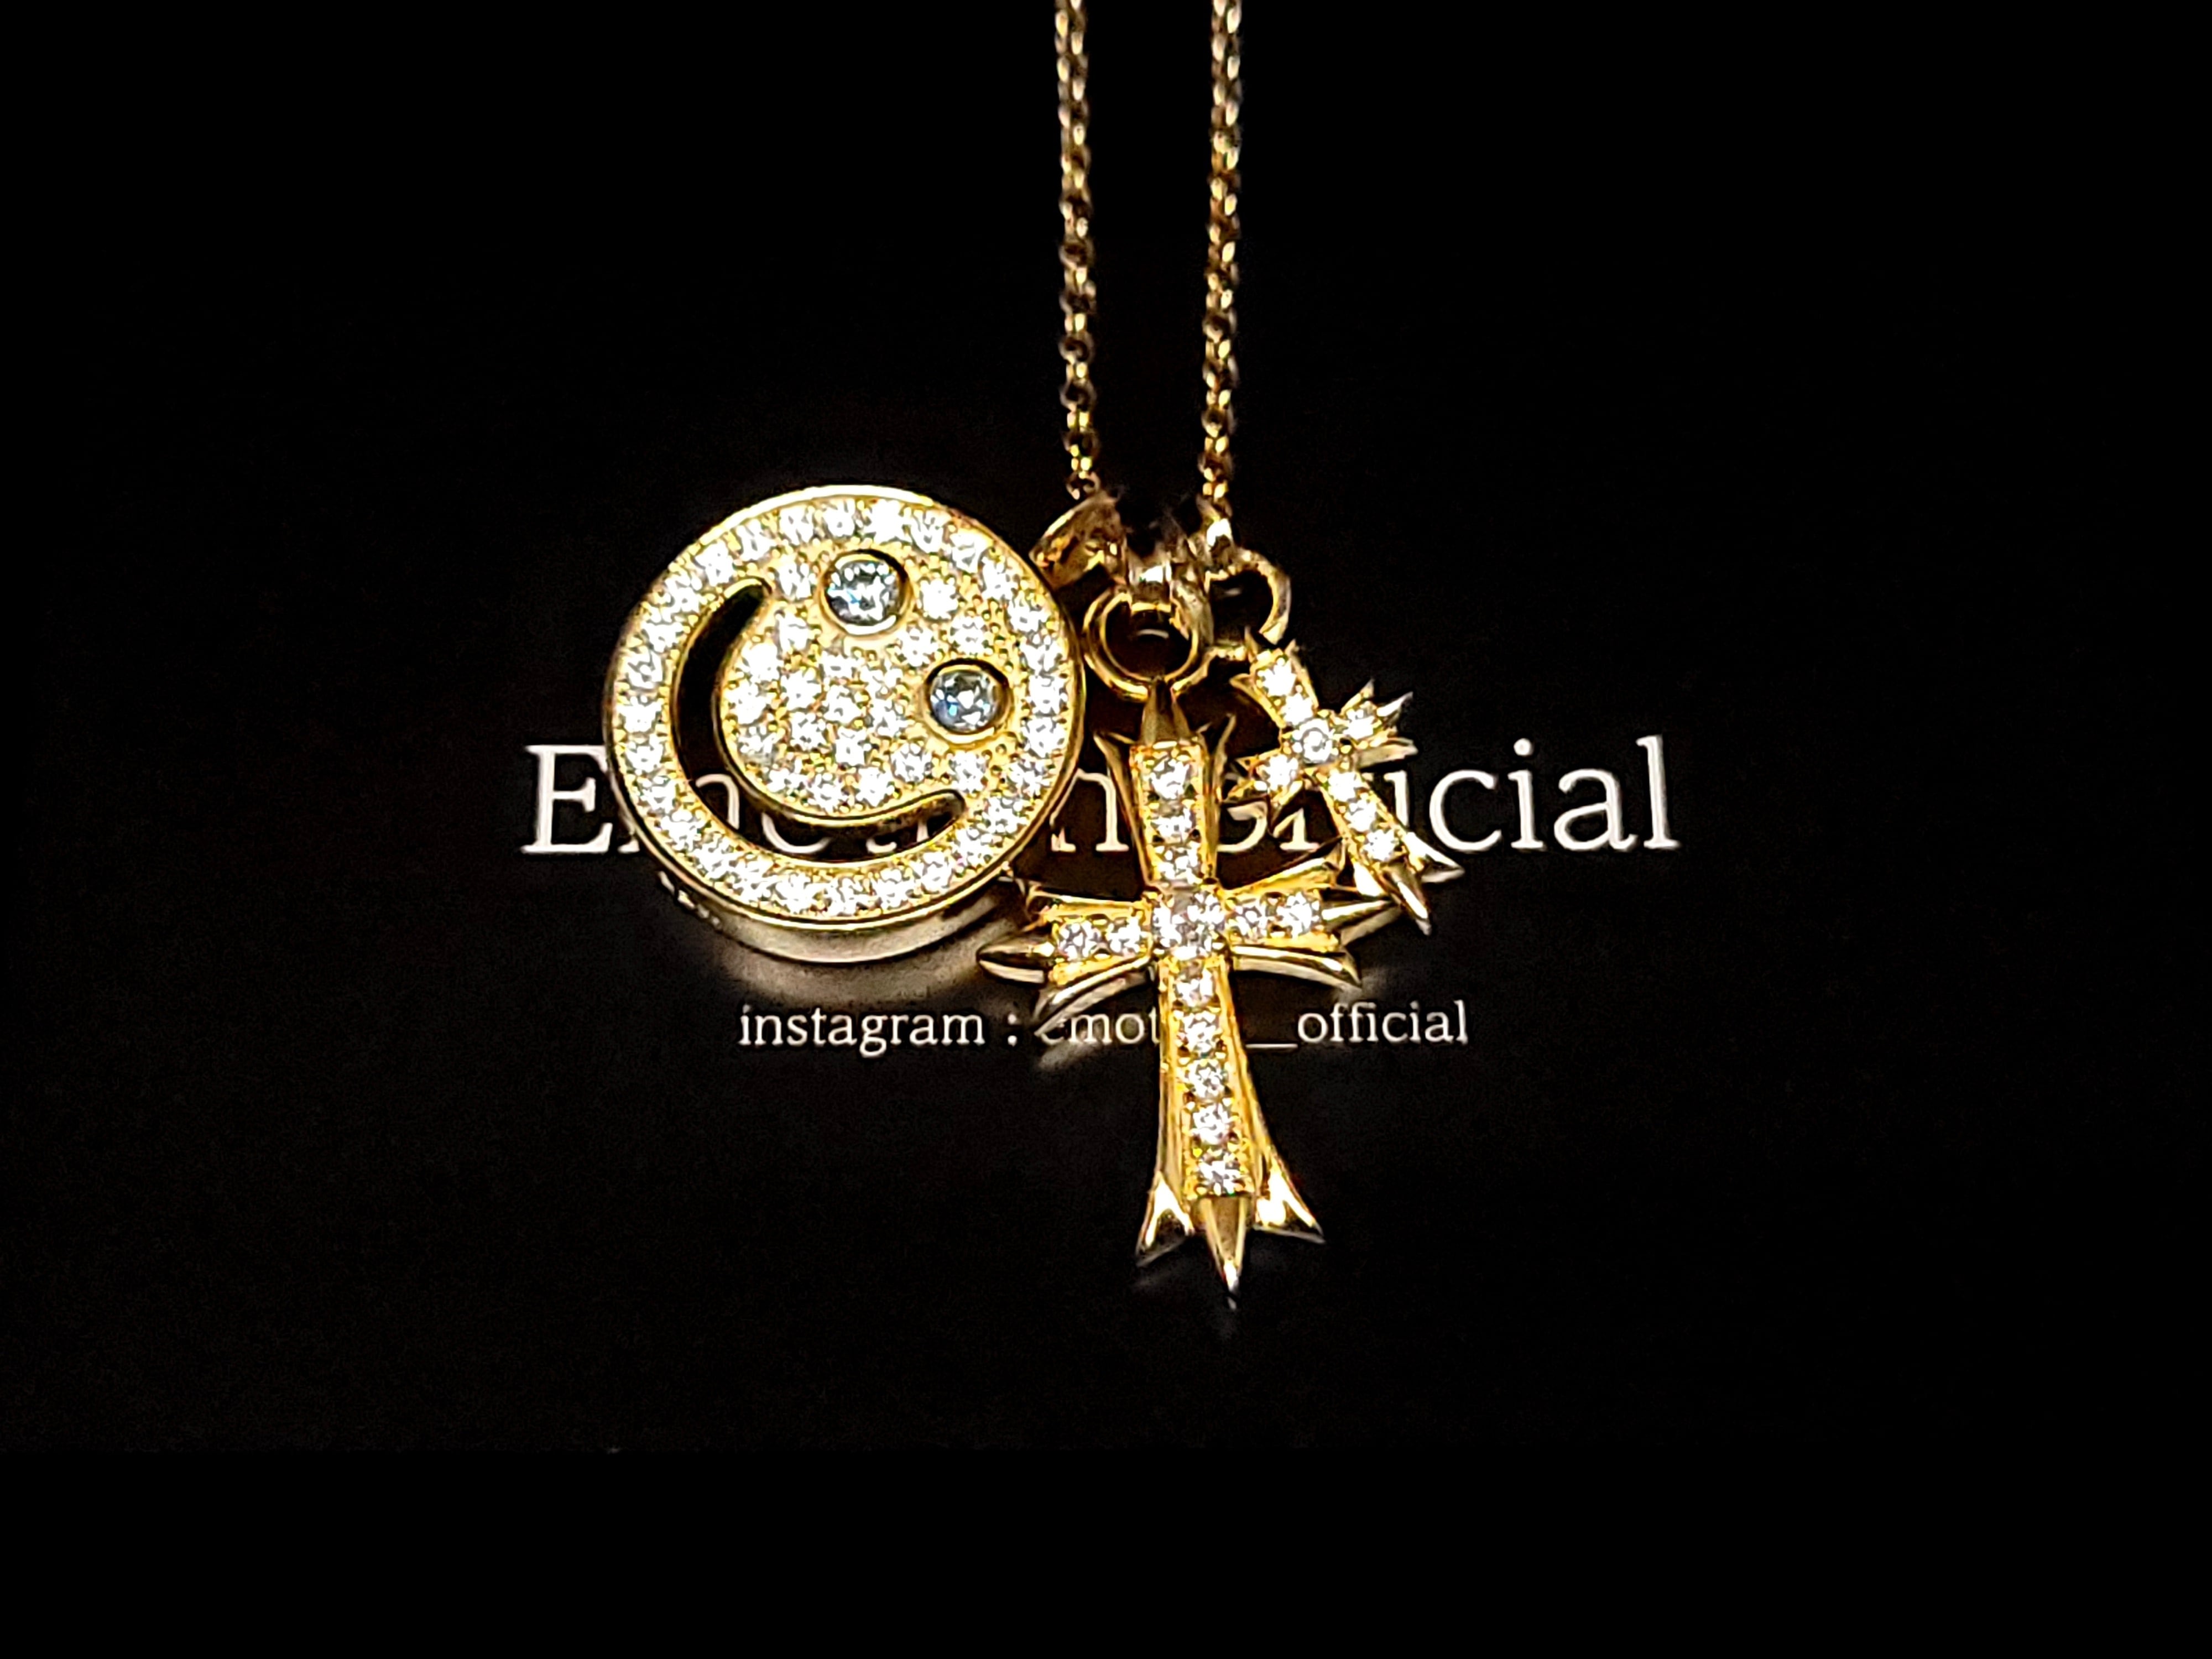 22k plating cz diamond original cross 3連 (yellow gold) | Emotion__official  powered by BASE